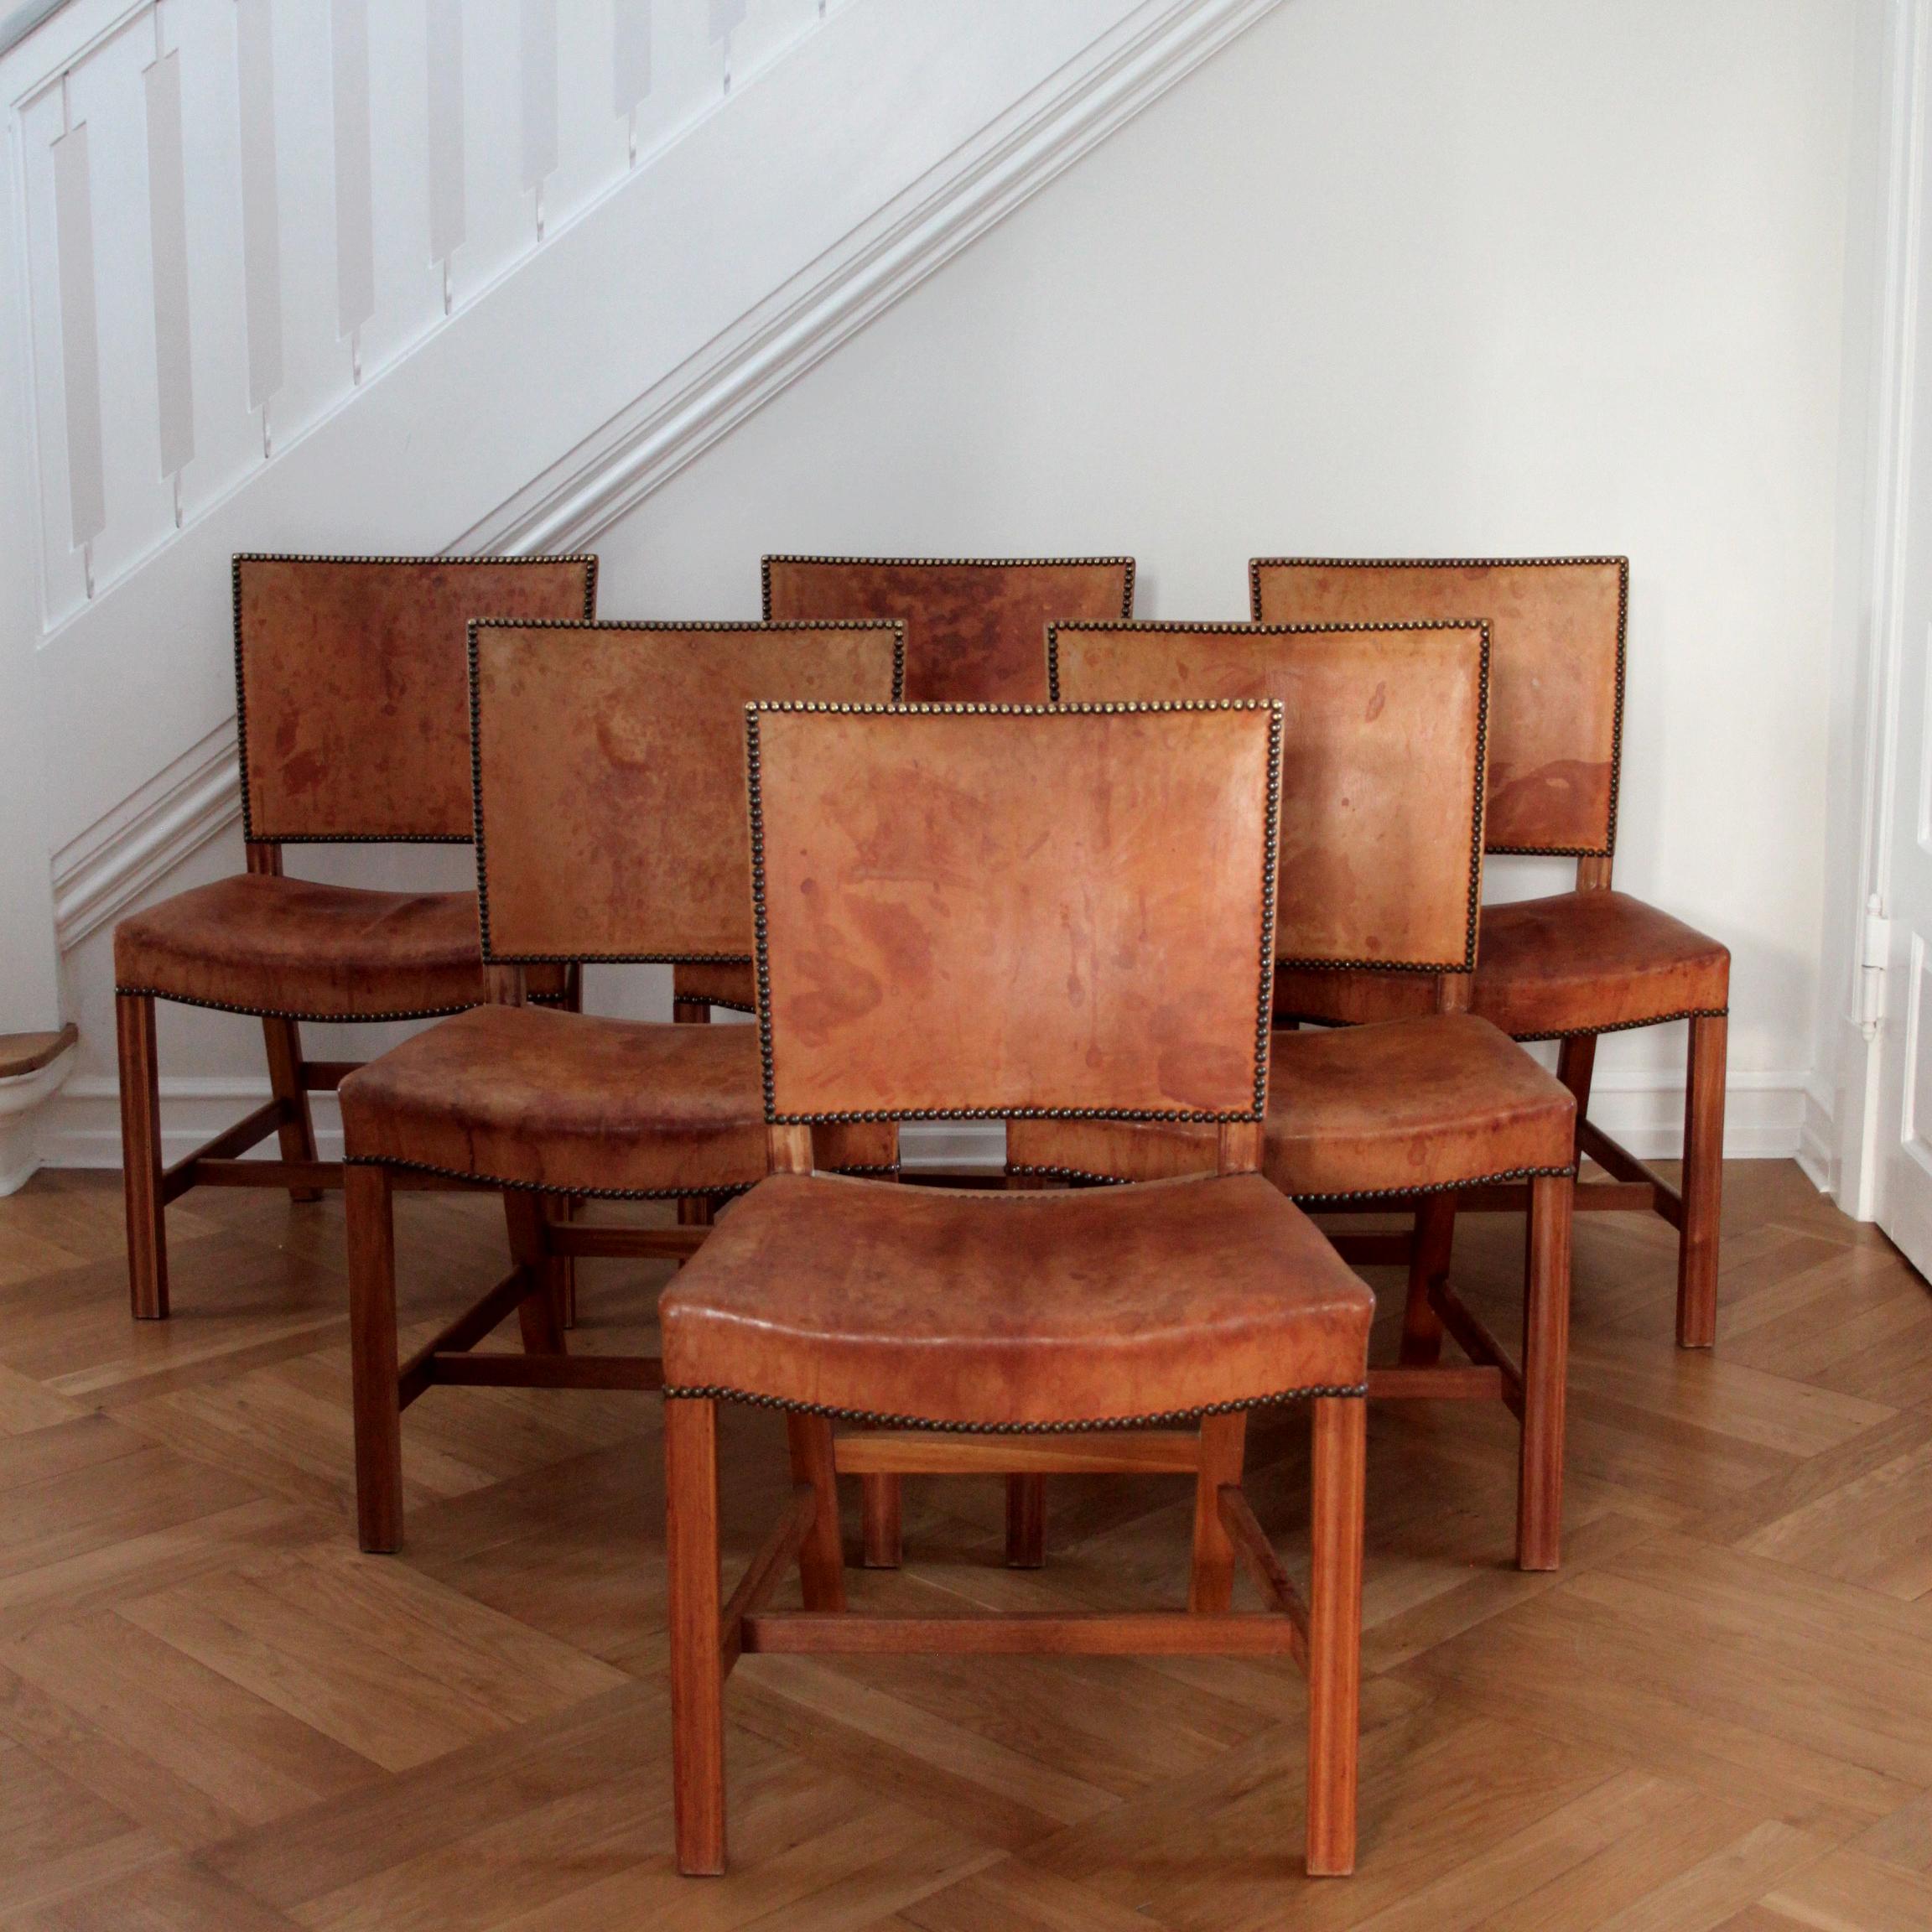 KAARE KLINT & RUD RASMUSSEN  - SCANDINAVIAN MODERN

A beautiful set of six Kaare Klint 'Red Chair' or 'Barcelona Chair' by Kaare Klint with deep patina in original Niger leather, profiled legs of mahogany and brass nails.

These examples made circa